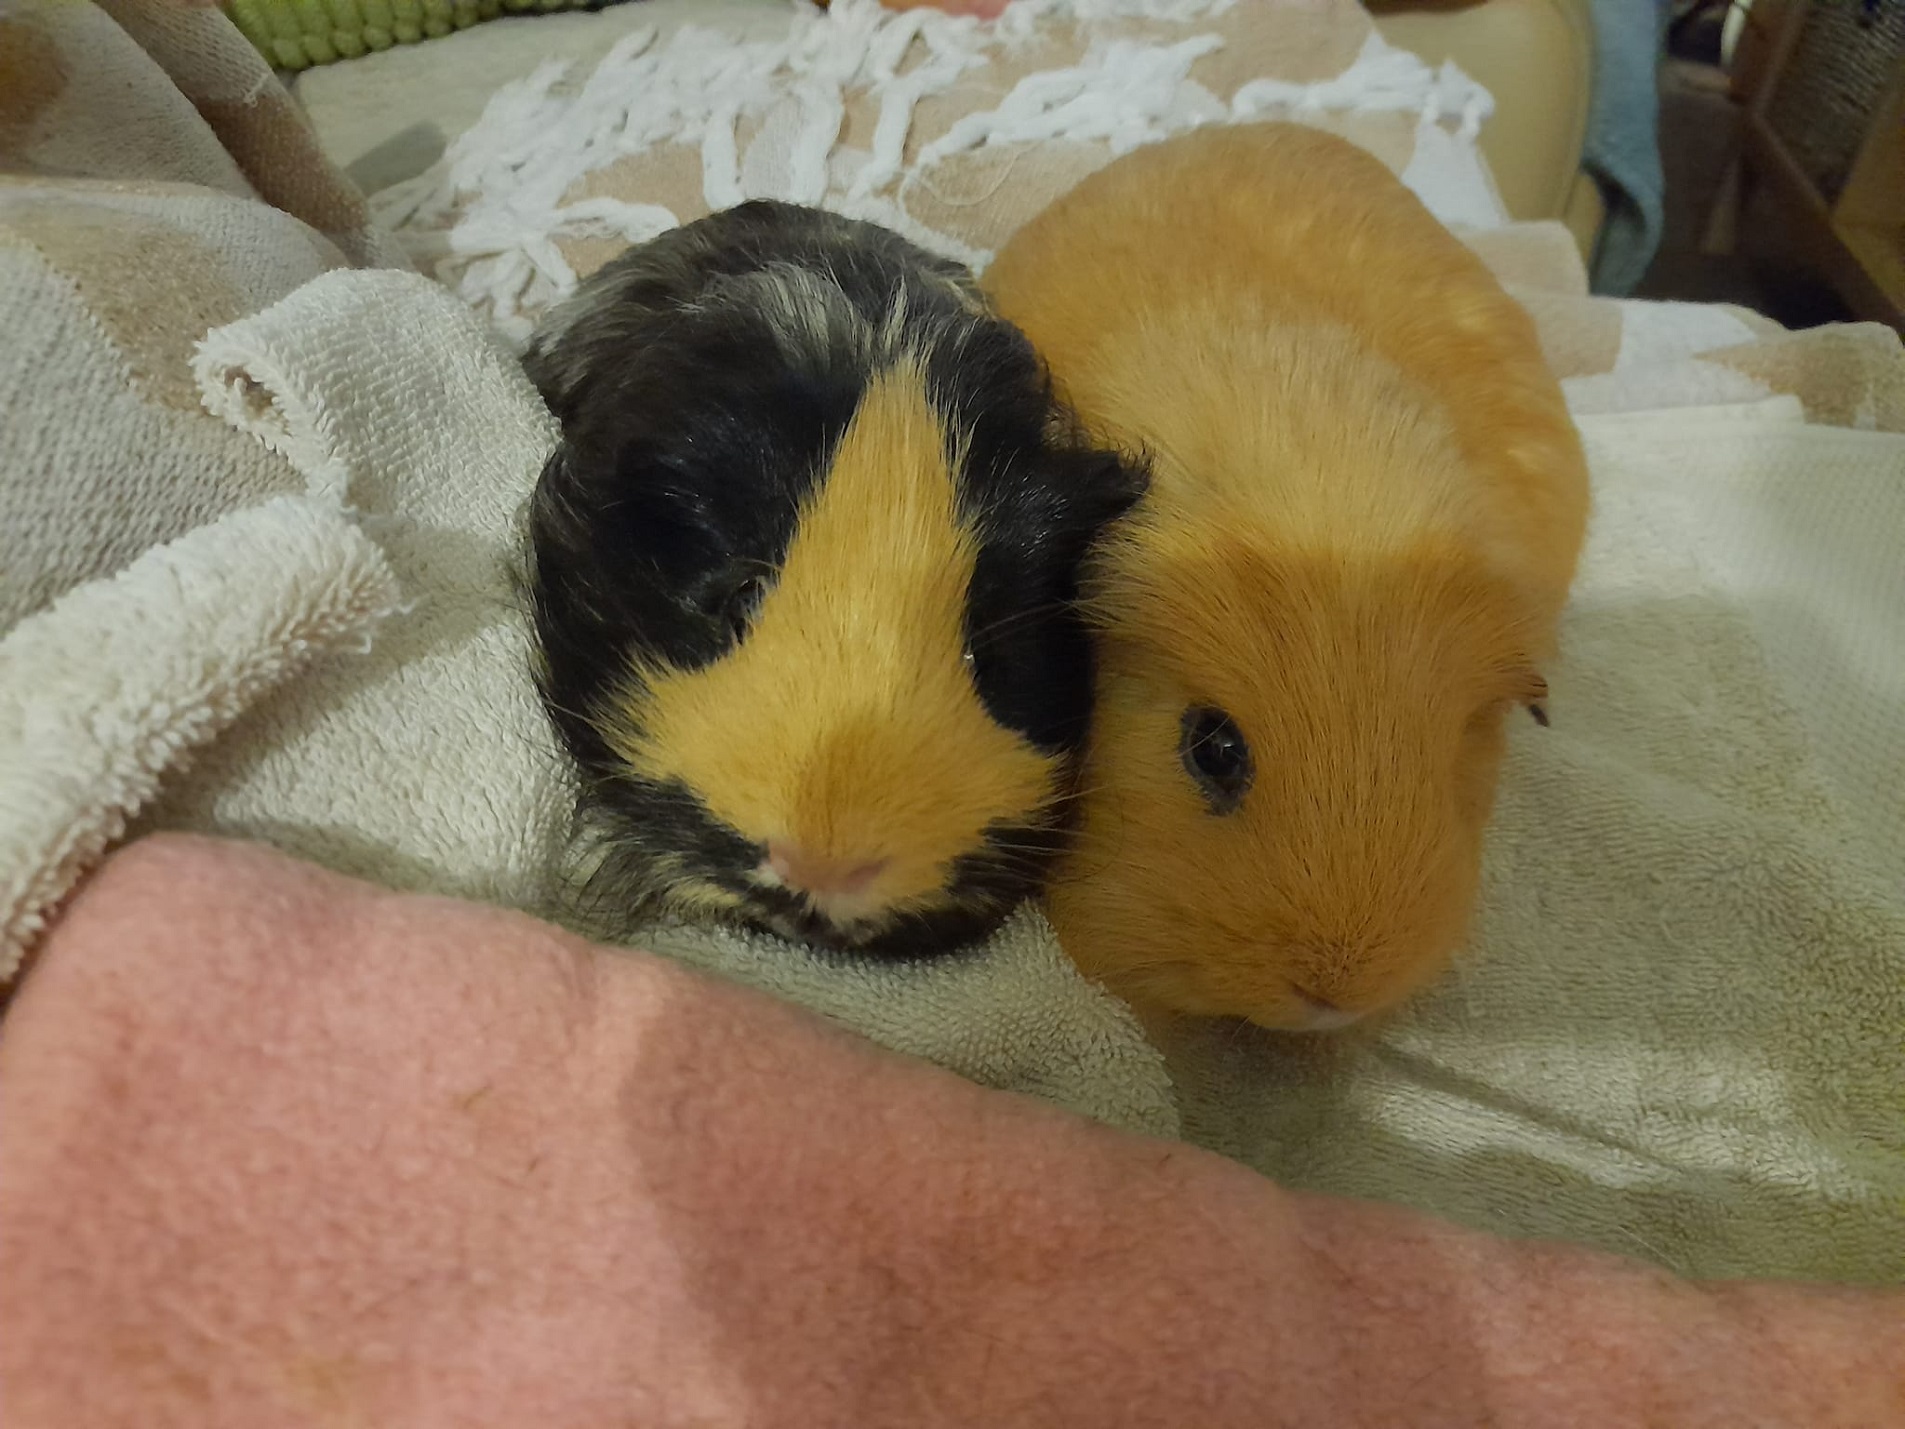 Marble & Fudge (Being Fostered)